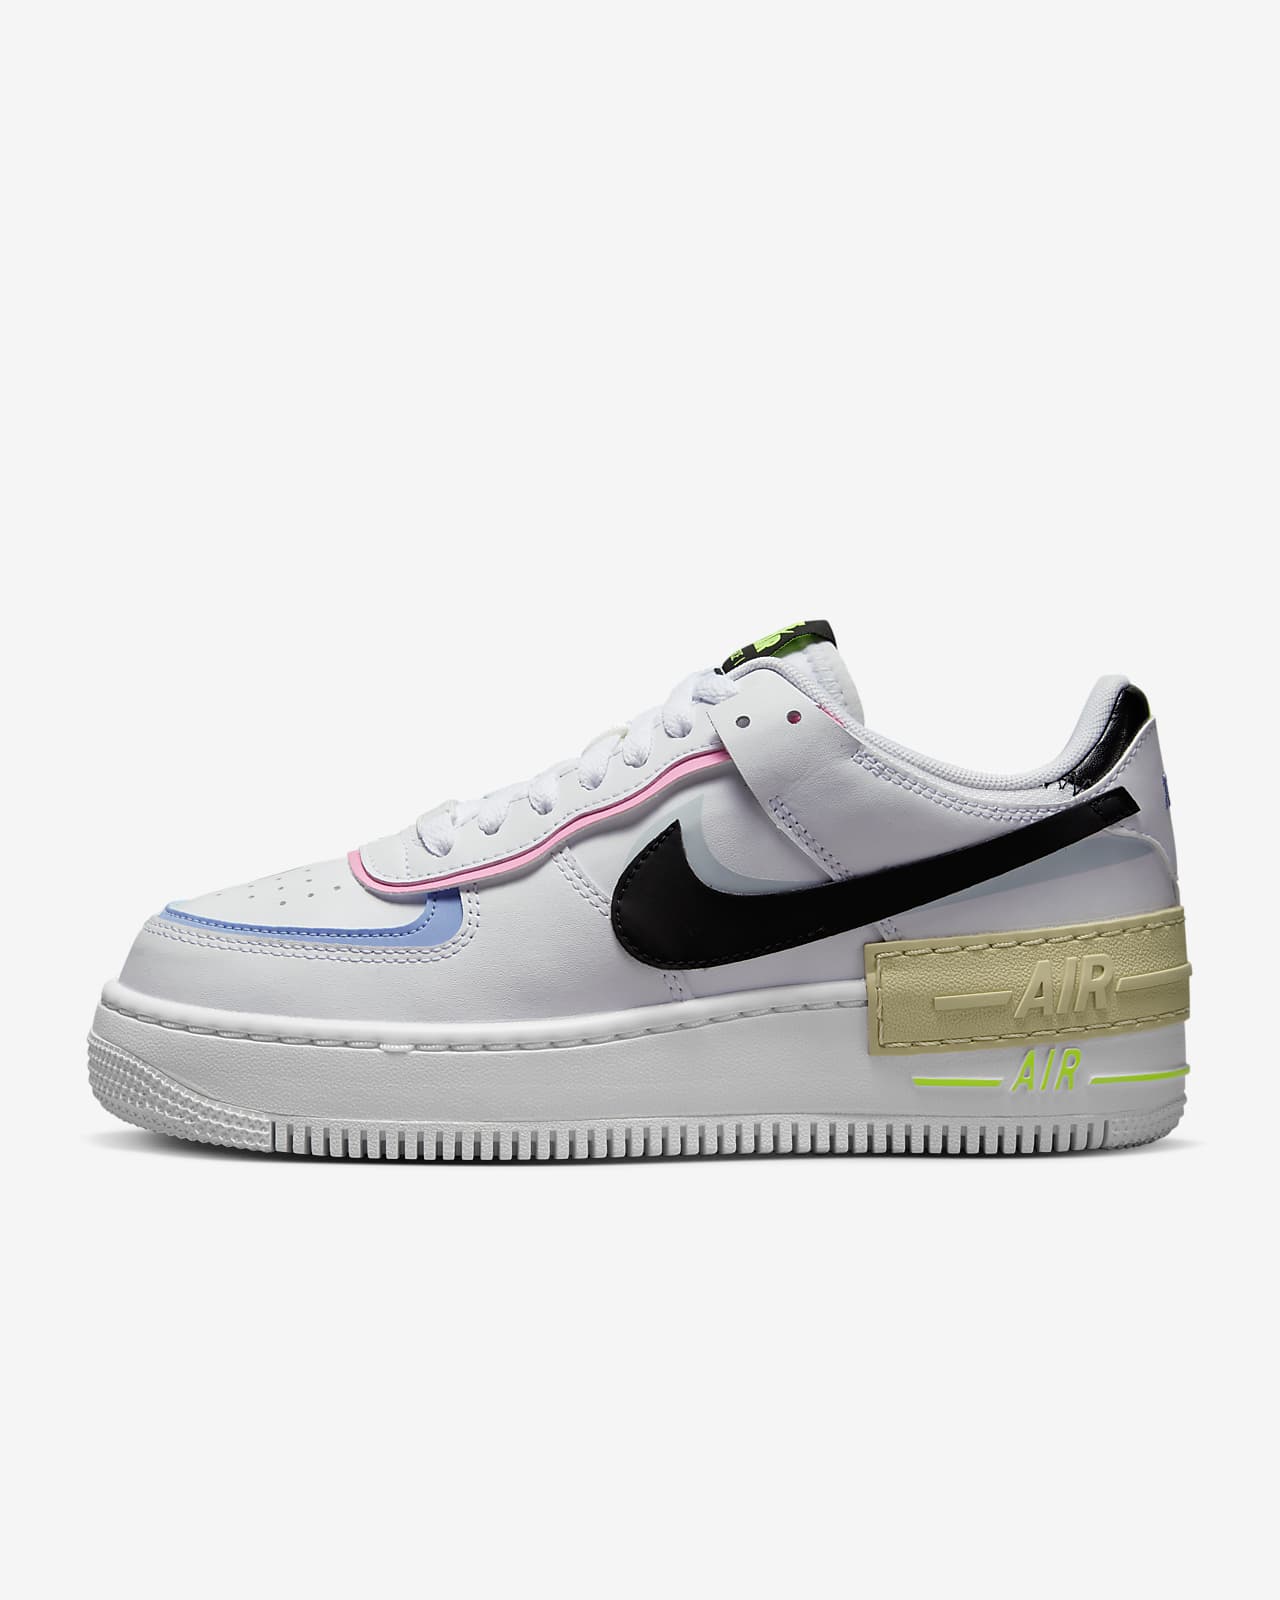 regret Conversely have confidence Nike Air Force 1 Shadow Women's Shoes. Nike.com